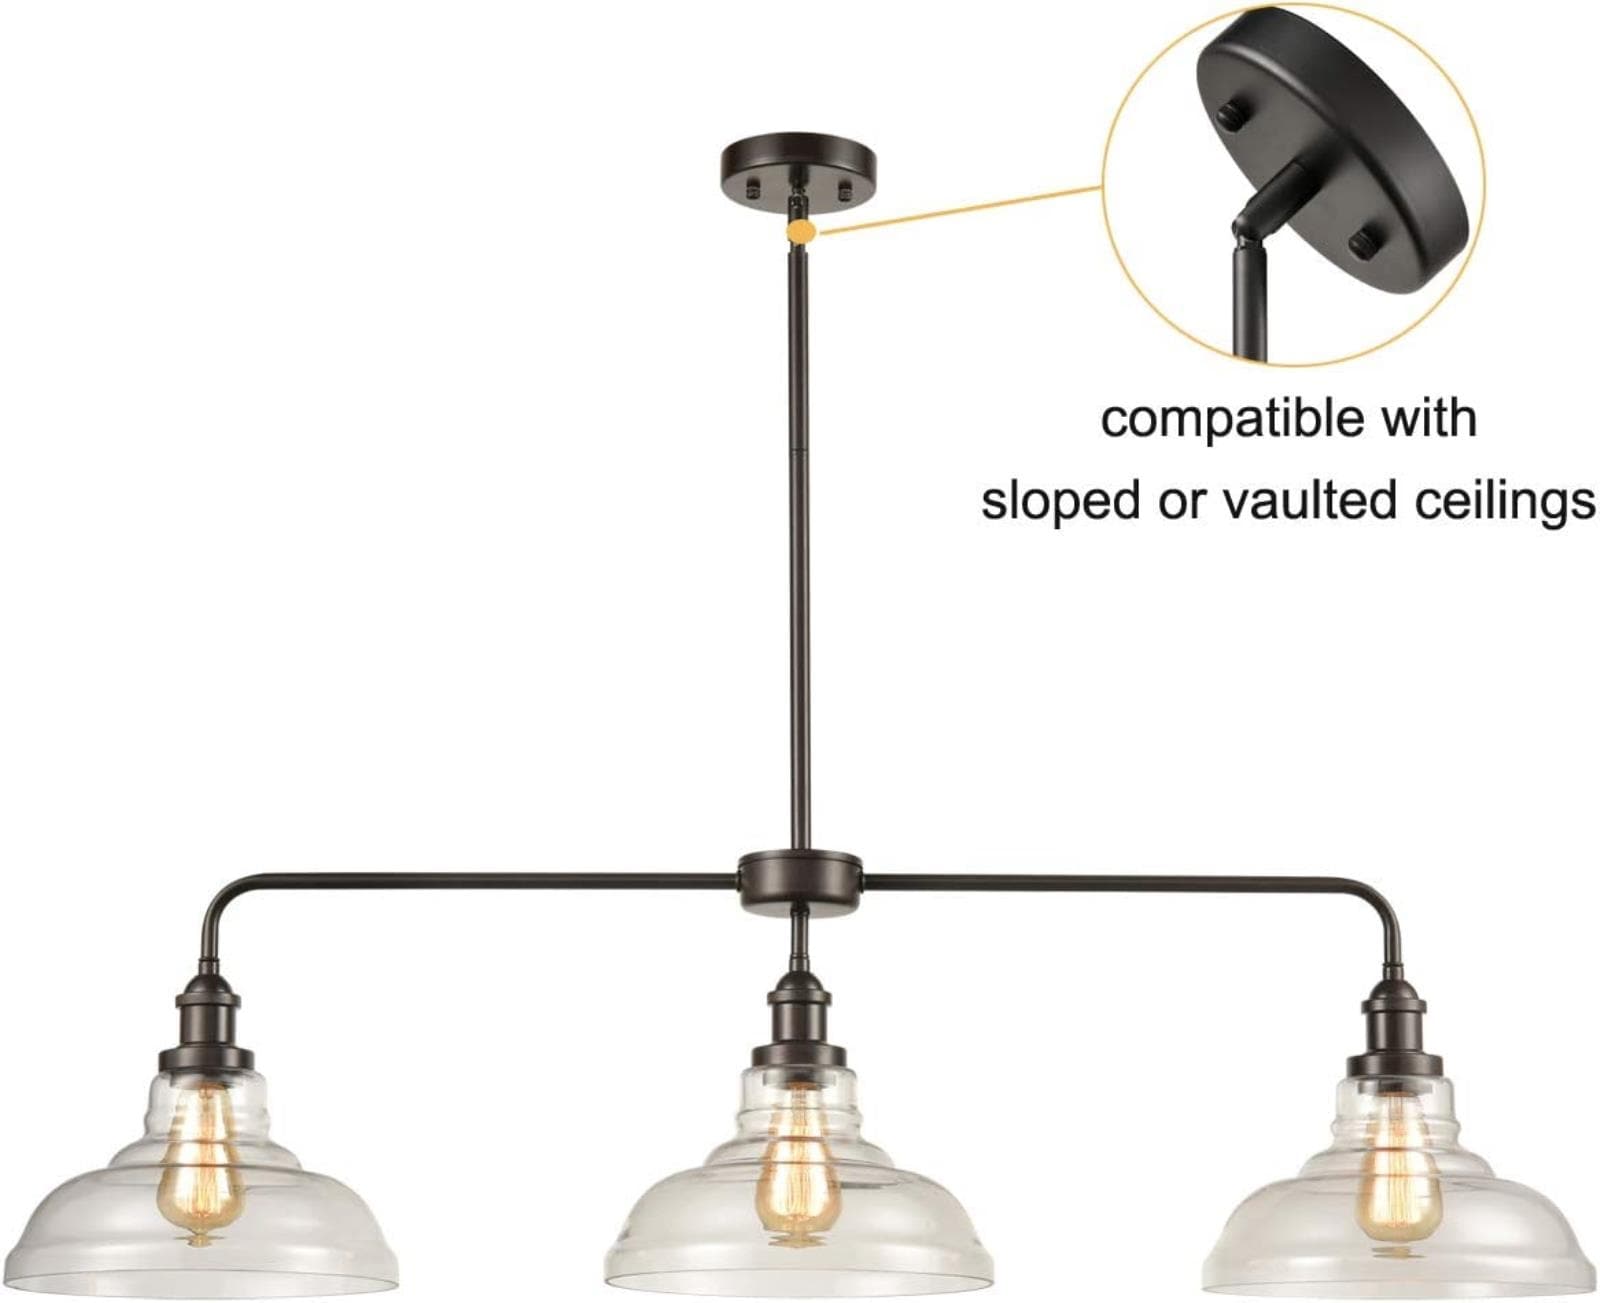 Claxy Glass Light 3-Light Oil Rubbed Bronze Industrial Led; Dry rated ...